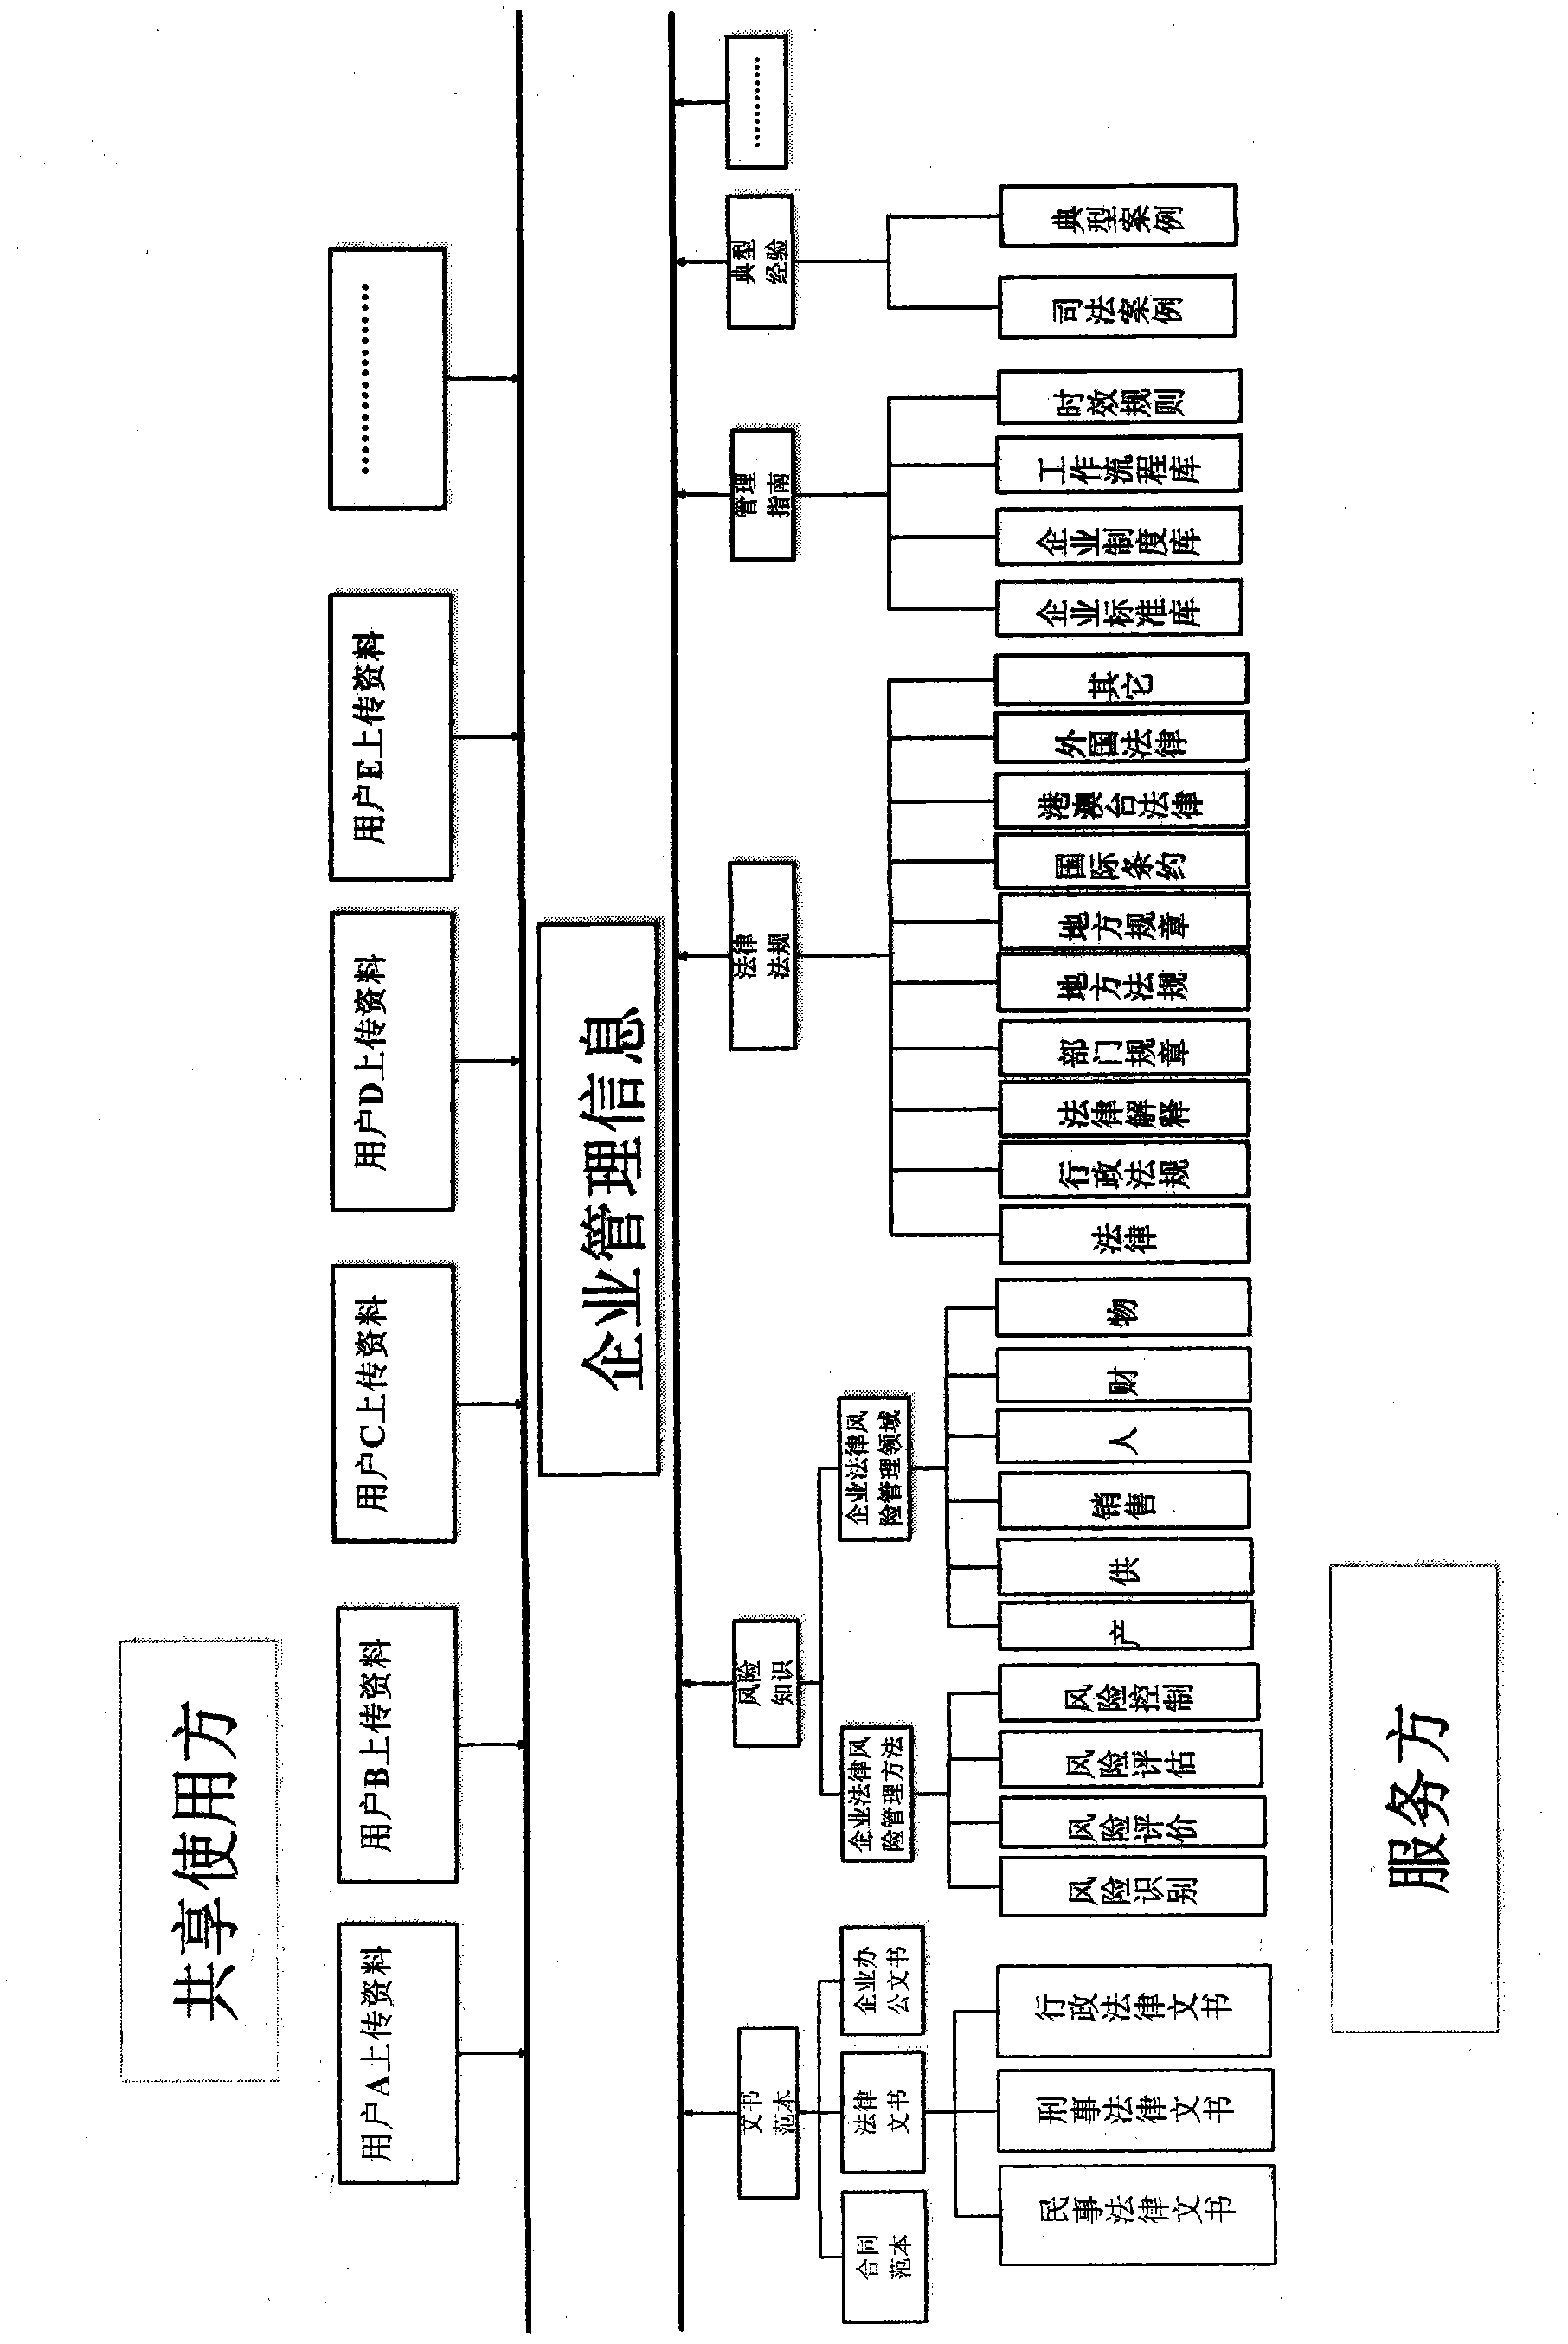 Three-word-in-one enterprise knowledge associative storing, searching and presenting method